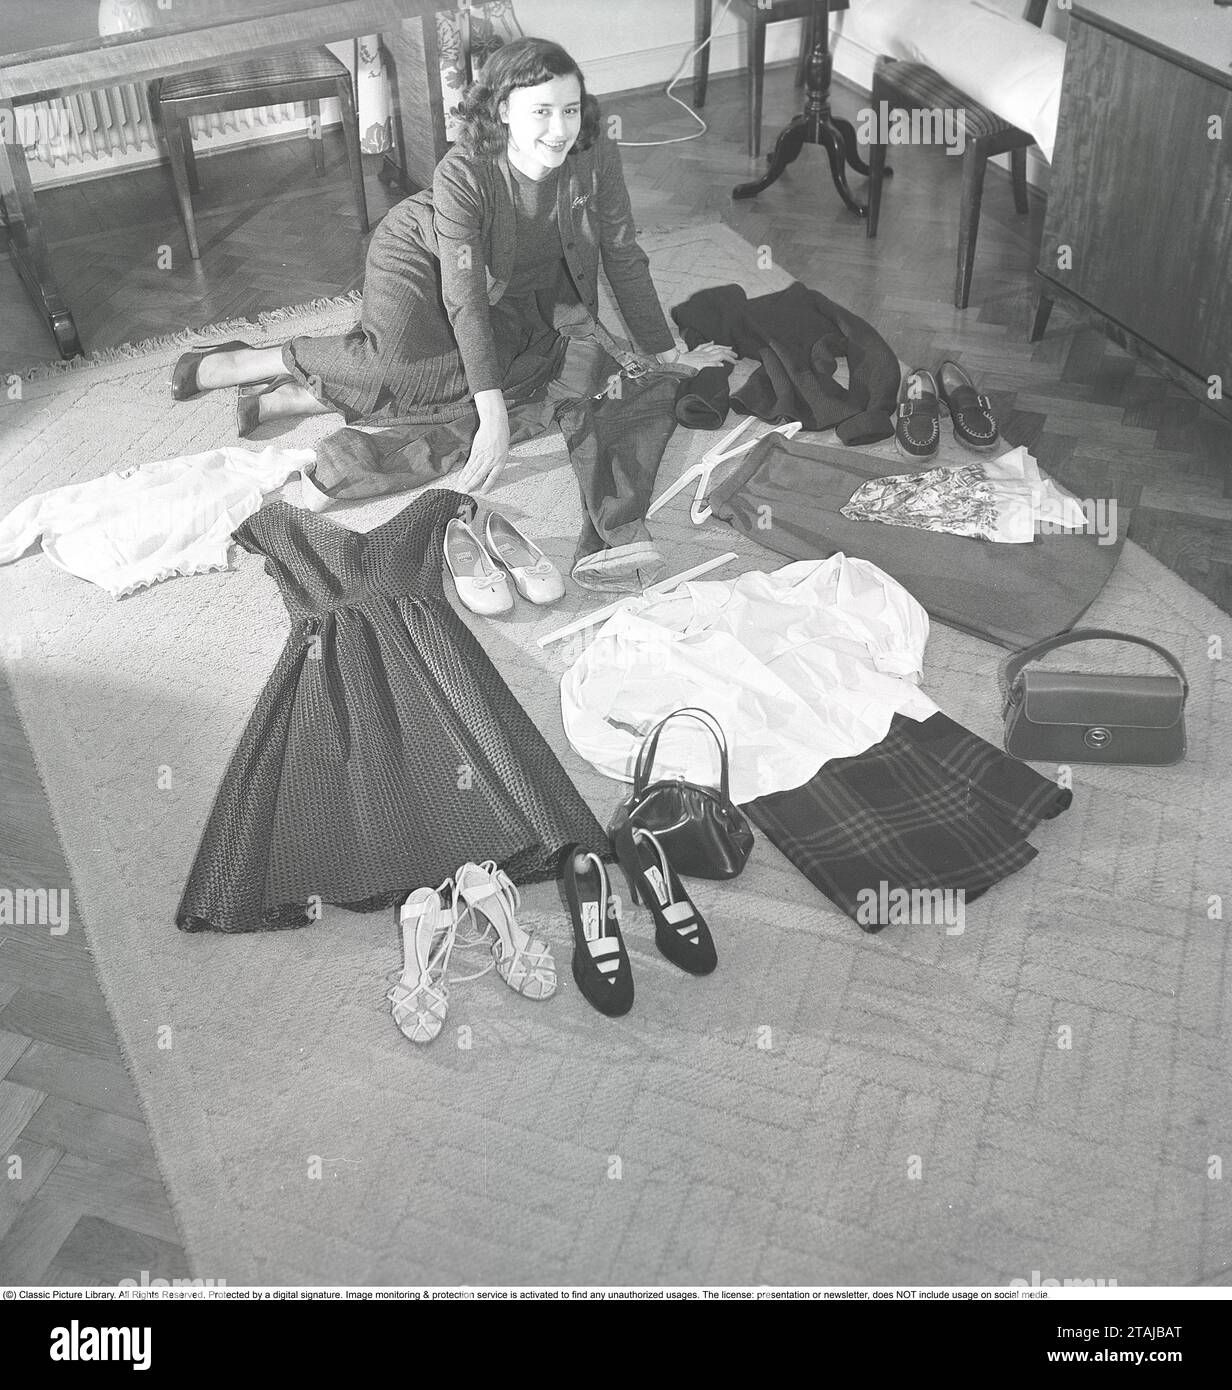 https://c8.alamy.com/comp/2TAJBAT/1950s-girl-actress-harriet-andersson-on-the-floor-where-also-part-of-her-wardrobe-is-seen-a-dress-skirts-in-different-lengths-shoes-and-jackets-in-the-typical-1950s-fashion-style-sweden-1952-kristoffersson-ref-bh81-4-2TAJBAT.jpg